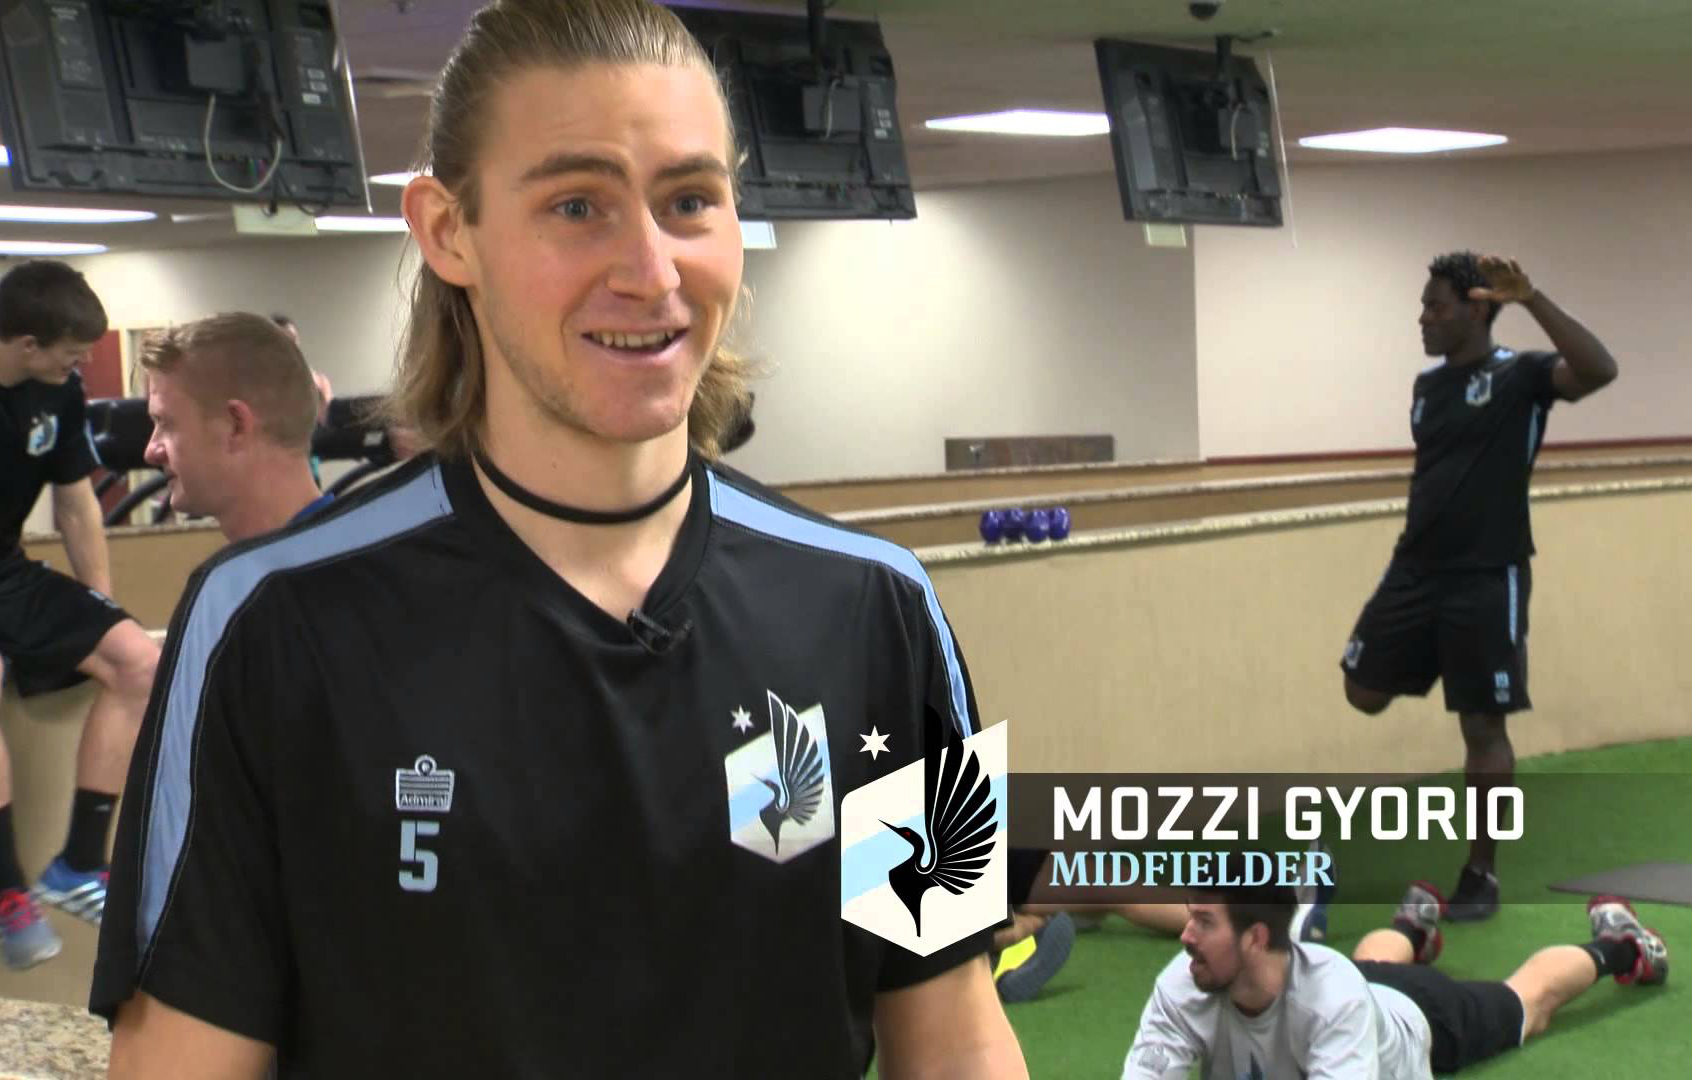 Judge Throws Out Mozzi Gyorio Lawsuit Against Minnesota United